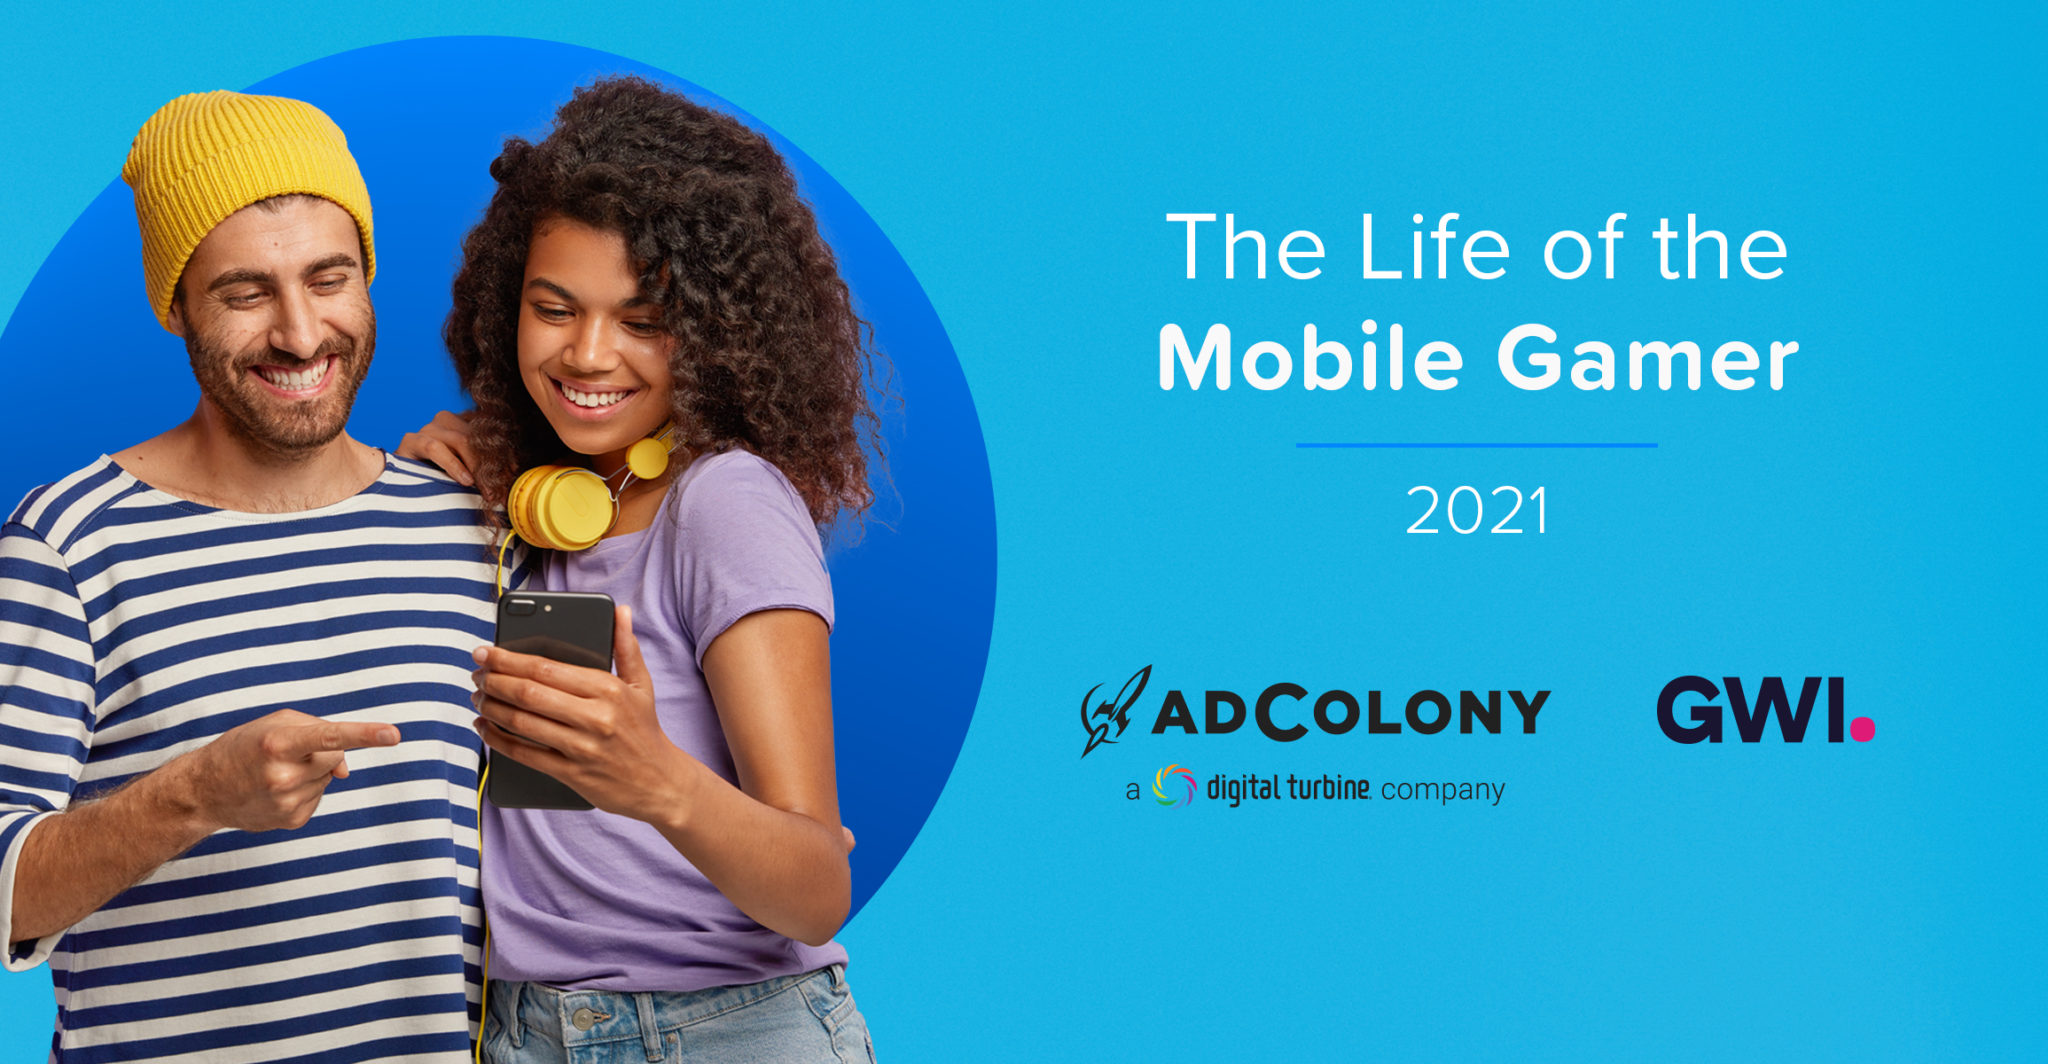 The Life of the Mobile Gamer 2022